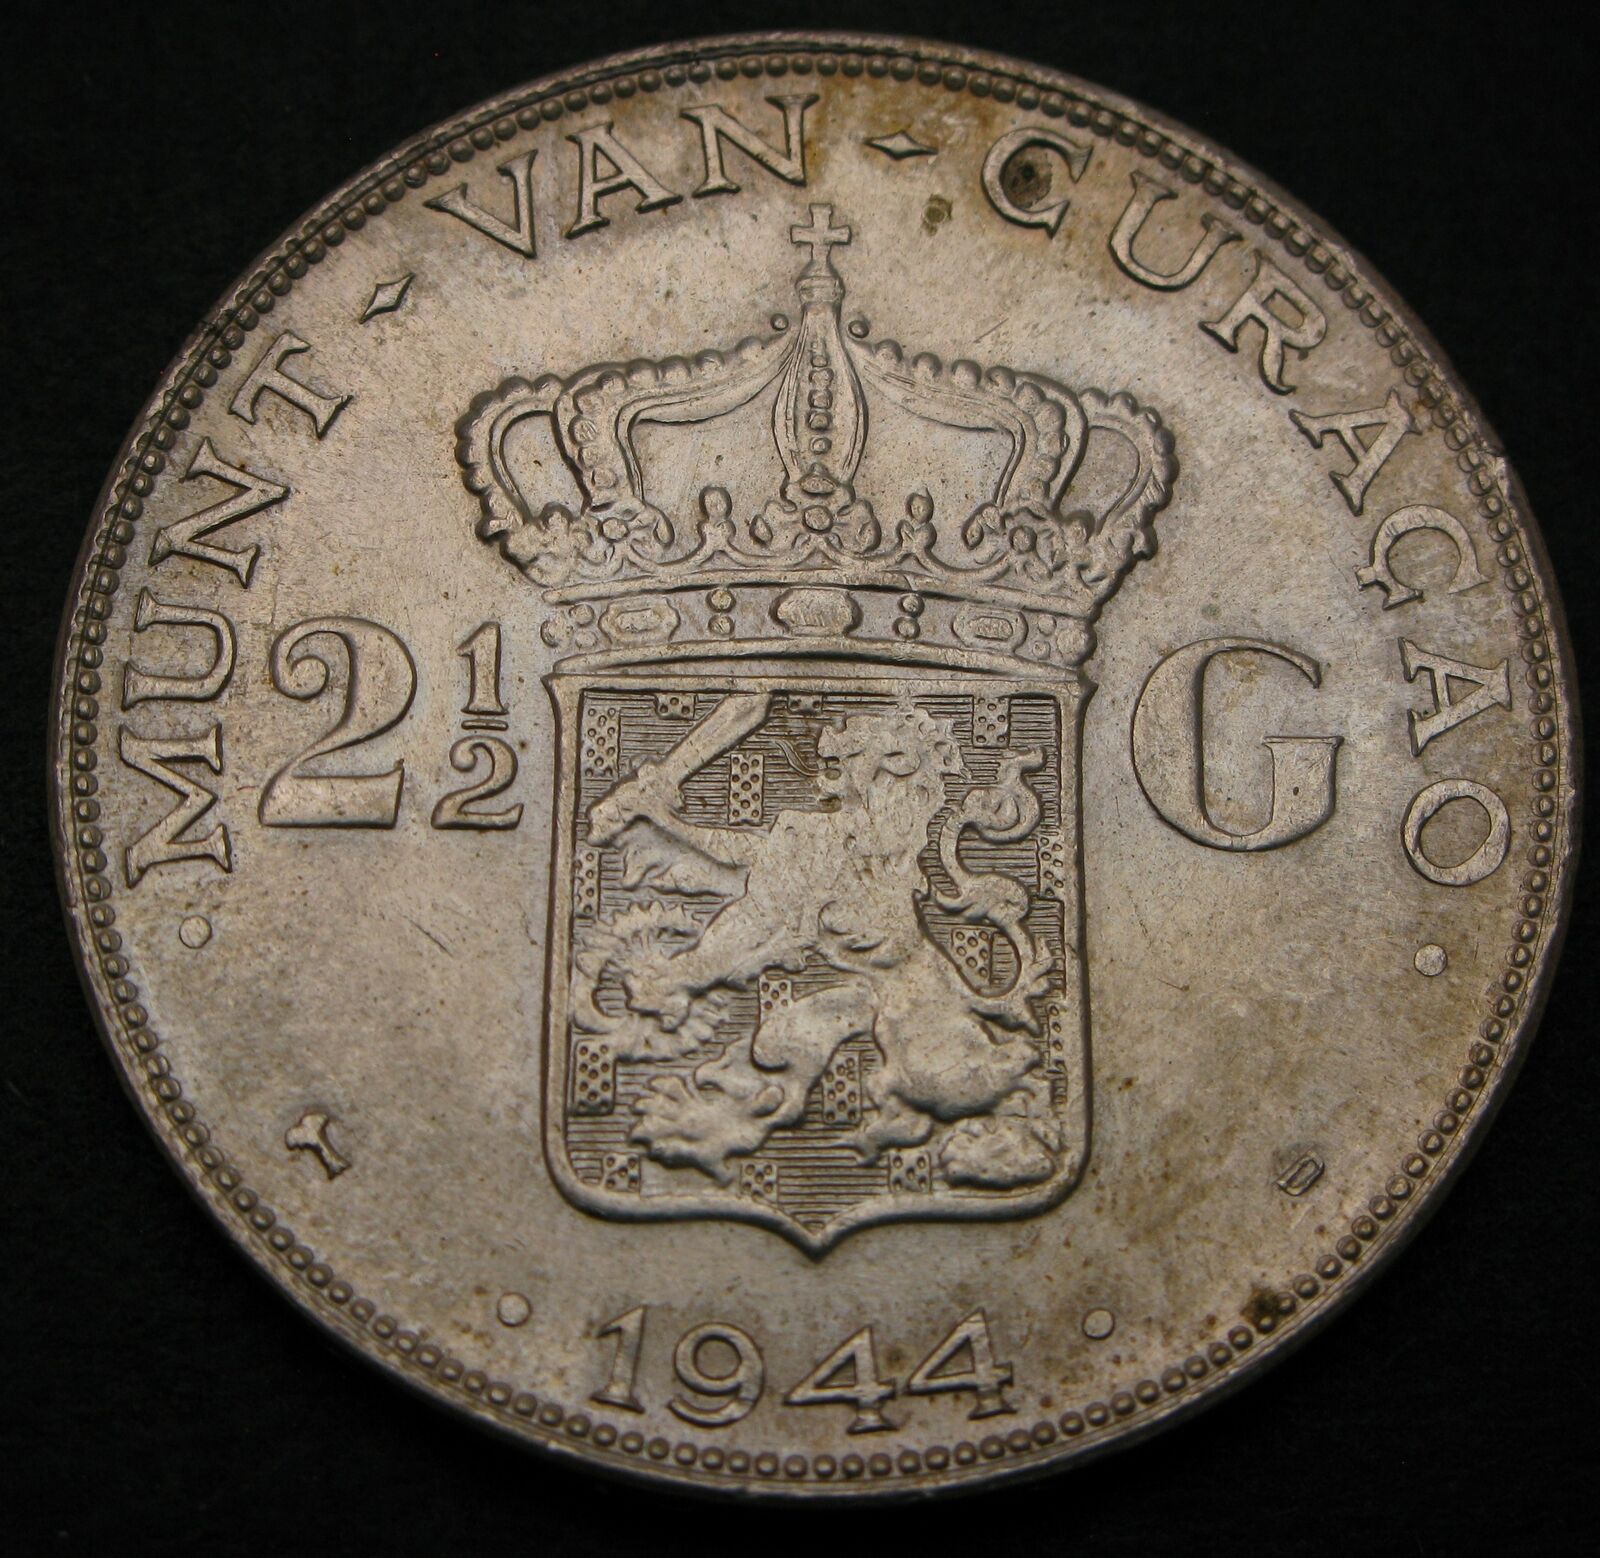 CURACAO (Kingdom of Netherlands) 2-1/2 Gulden 1944 D - Silver - XF/aUNC - 2154